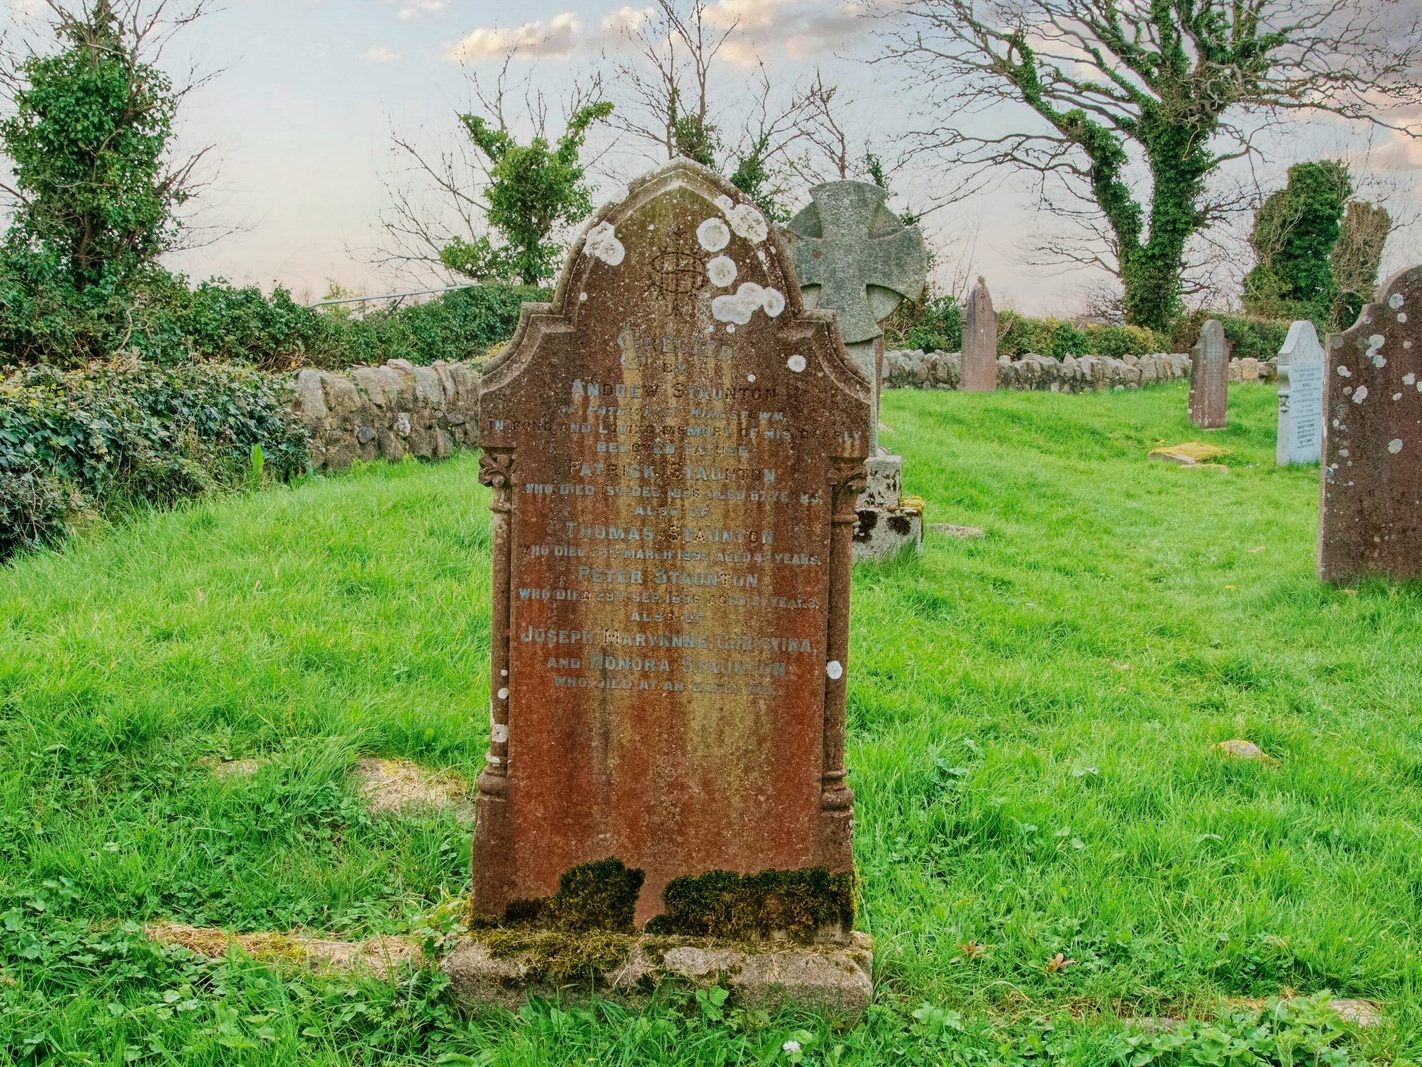 TWO CROSSES AND TULLY CHURCH AT LAUGHANSOWN LANE [THE CHURCH AND GRAVES]-223565-1